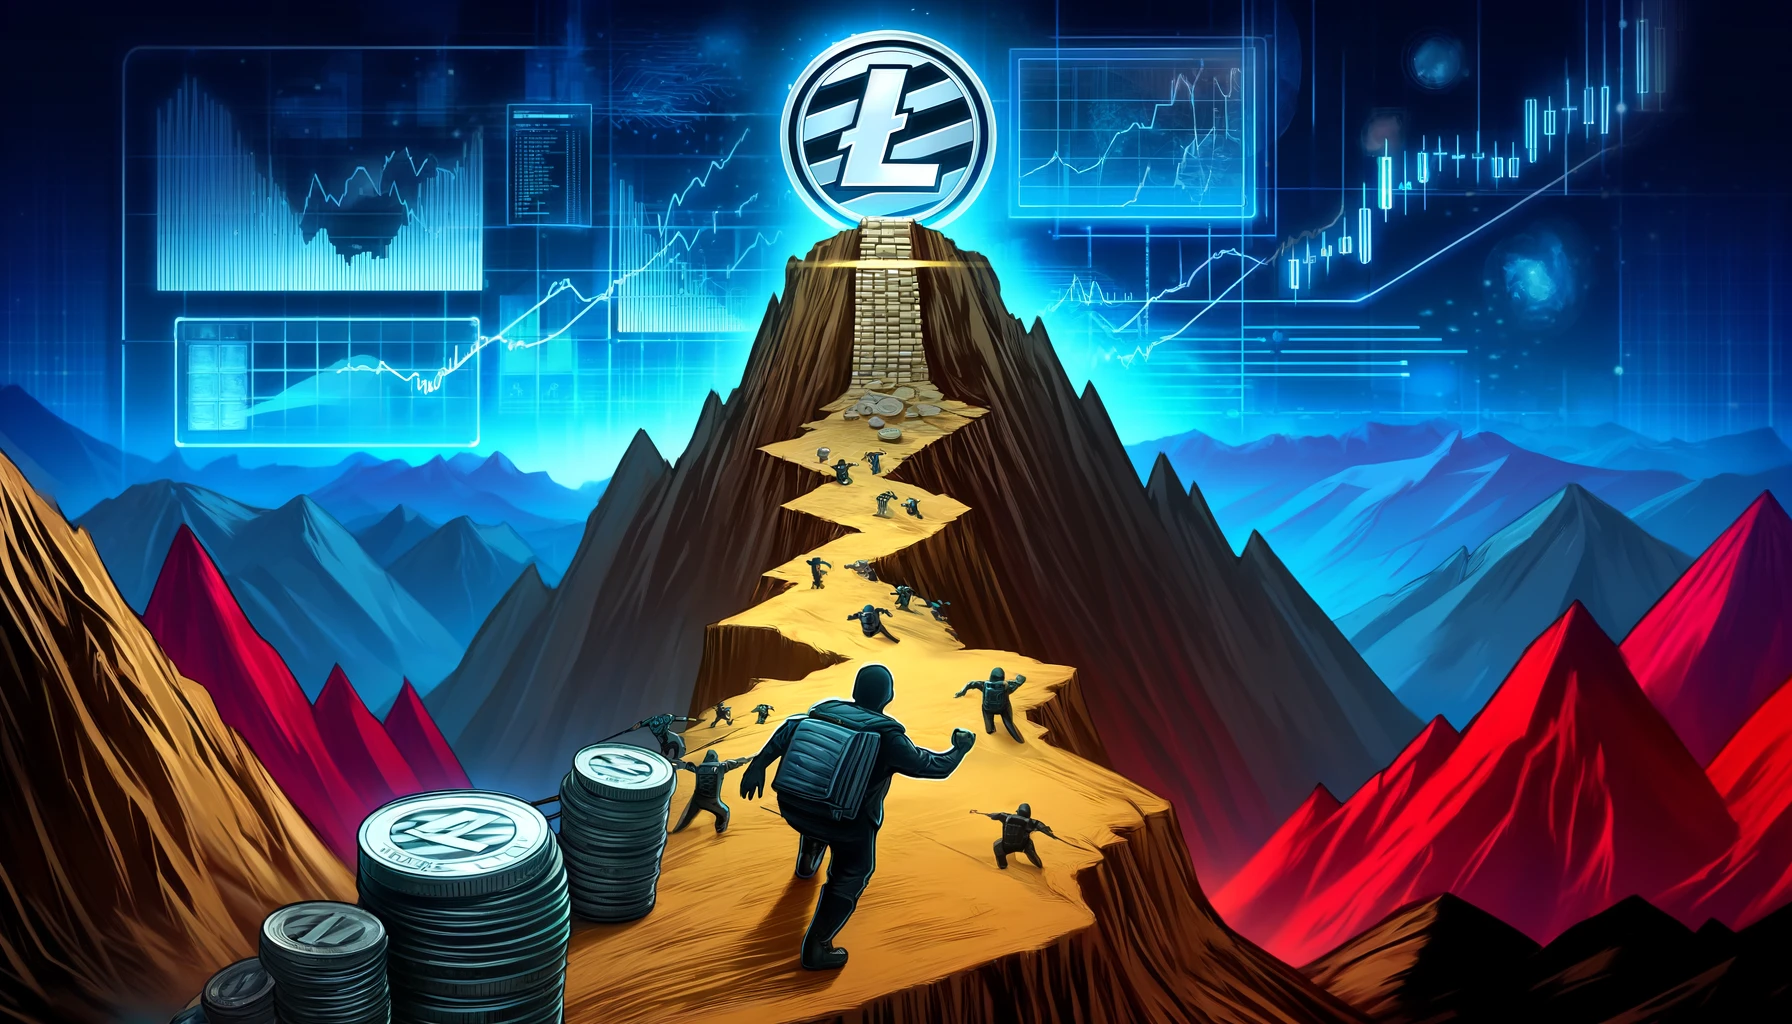 Litecoin In Uphill Battle: Strong Resistance Might Block Recovery